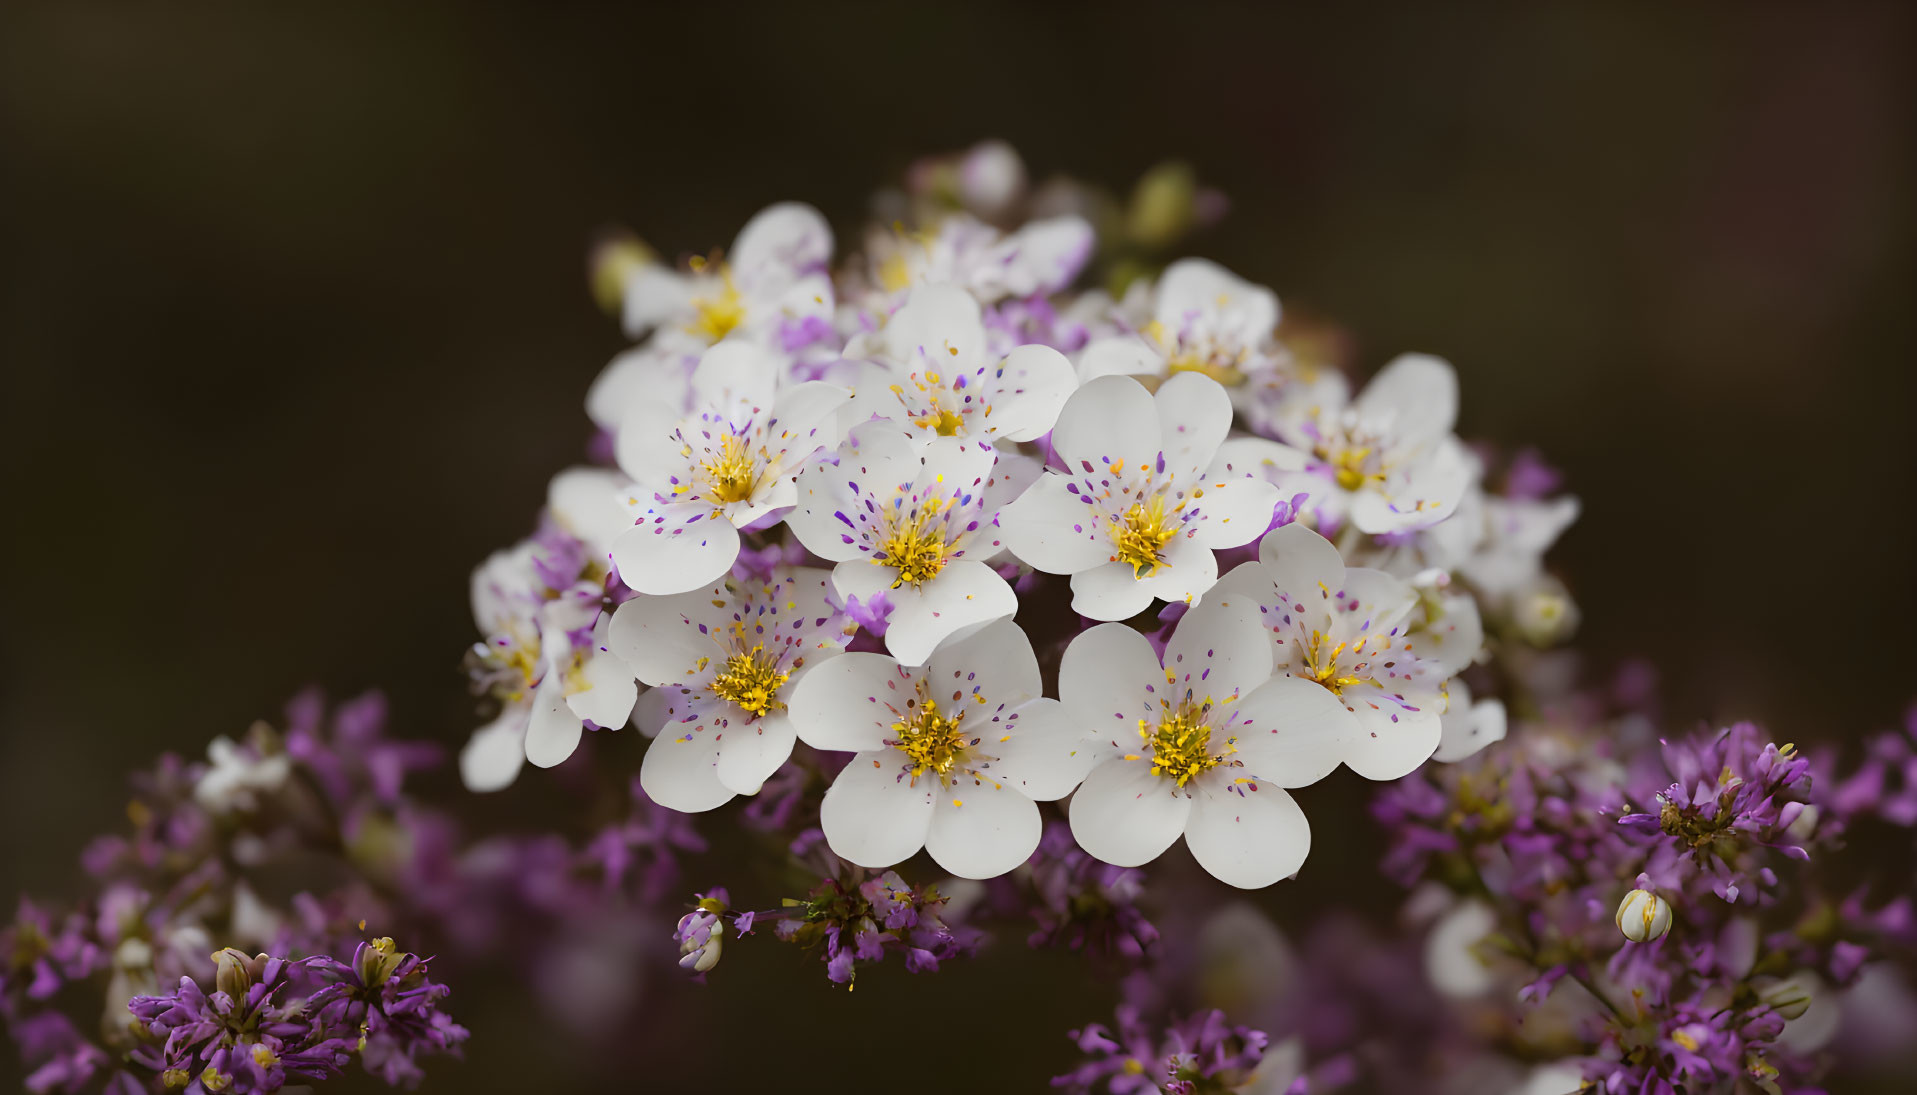 Delicate white flowers with yellow centers and purple speckles on blurred purple buds.